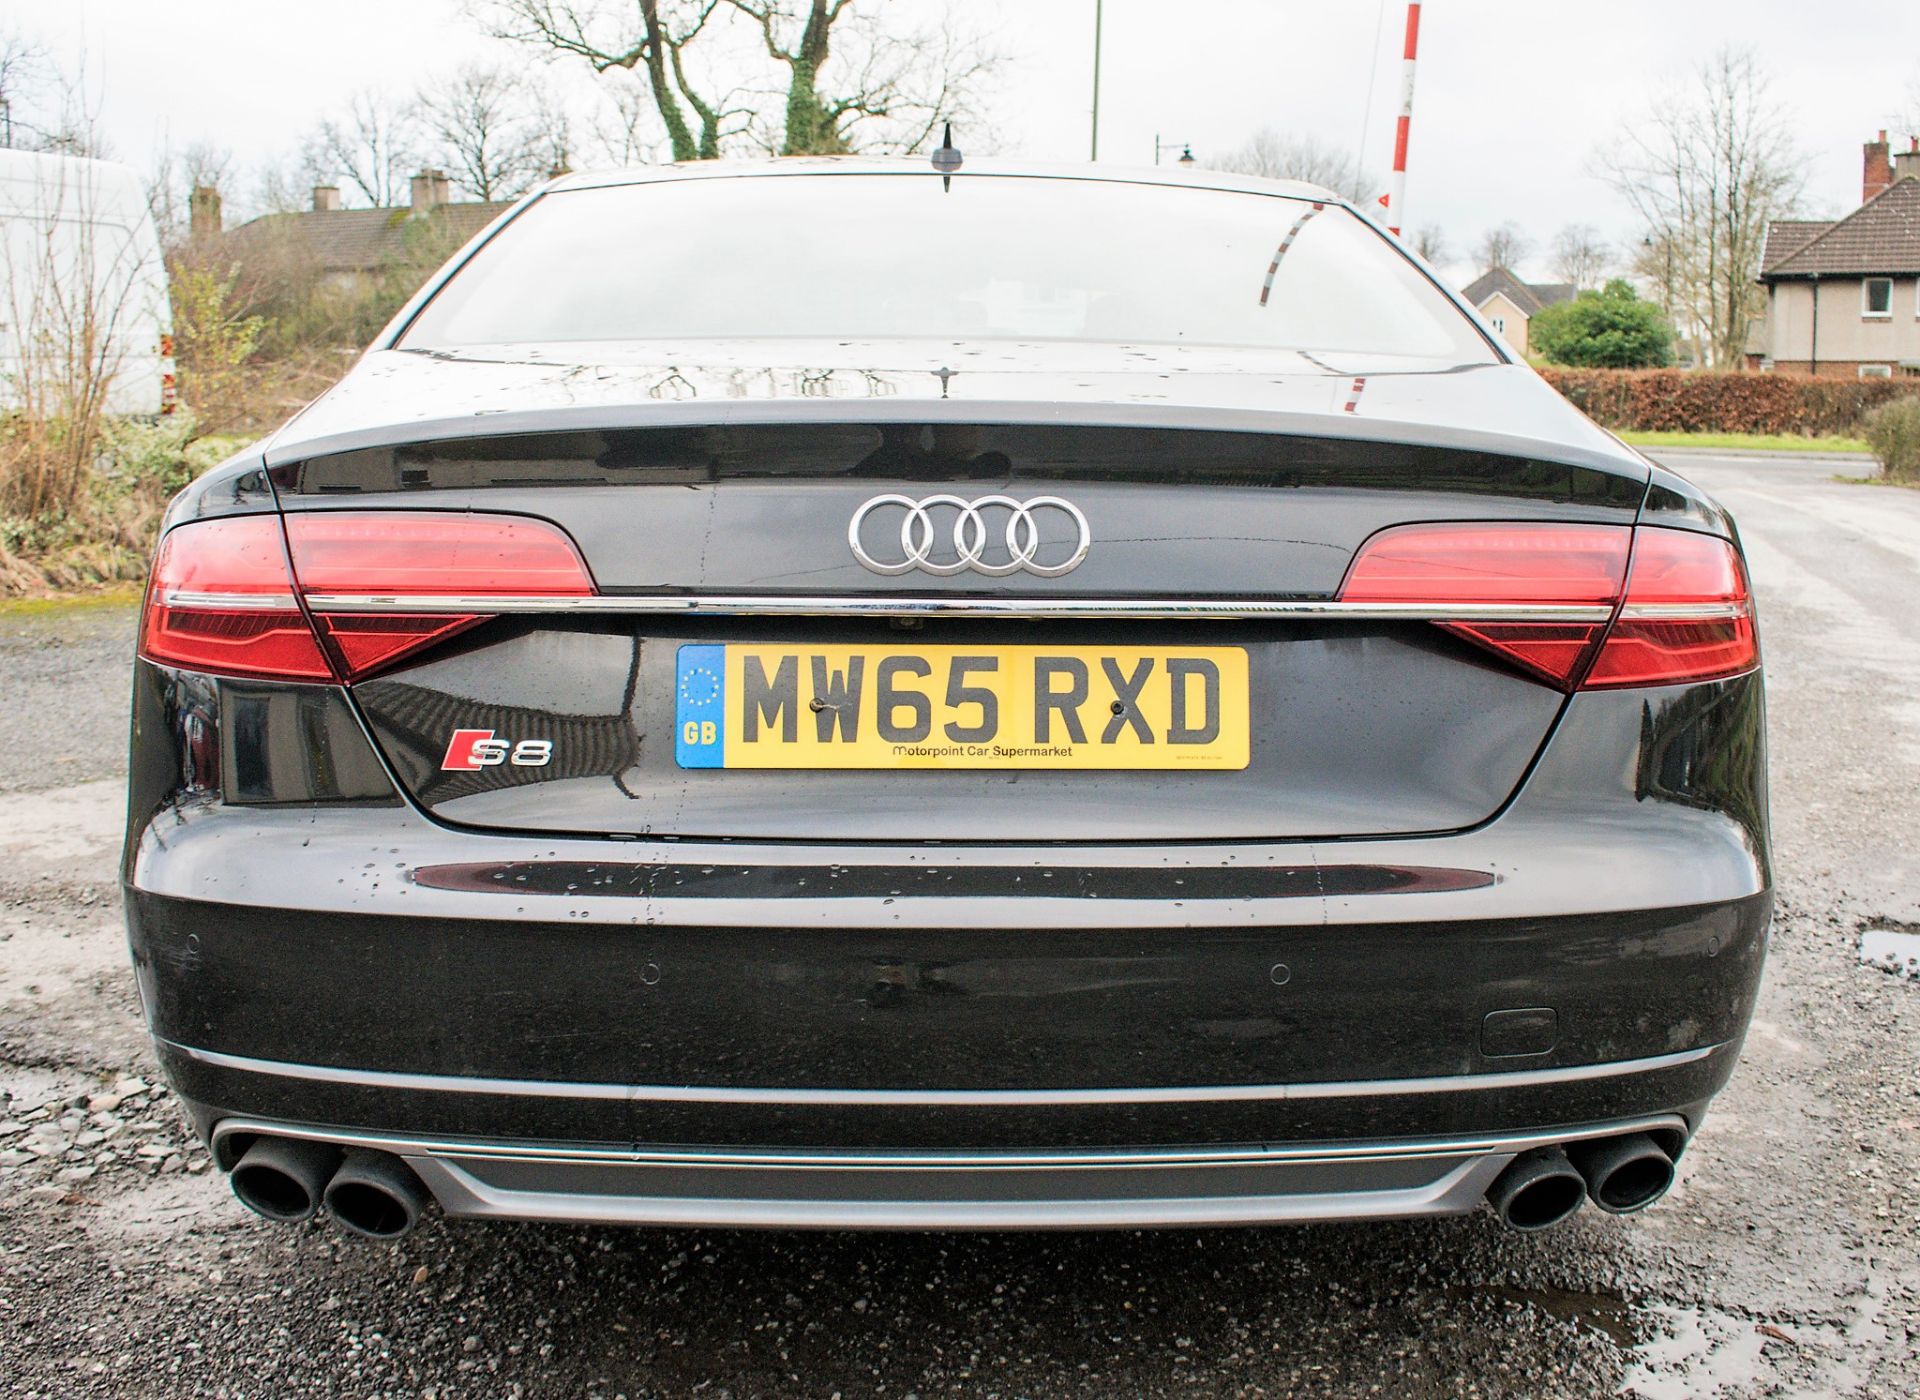 Audi S8 V8 TFSi Quattro Auto 4 door saloon car Registration Number: MW65 RXD Date of Registration: - Image 6 of 20